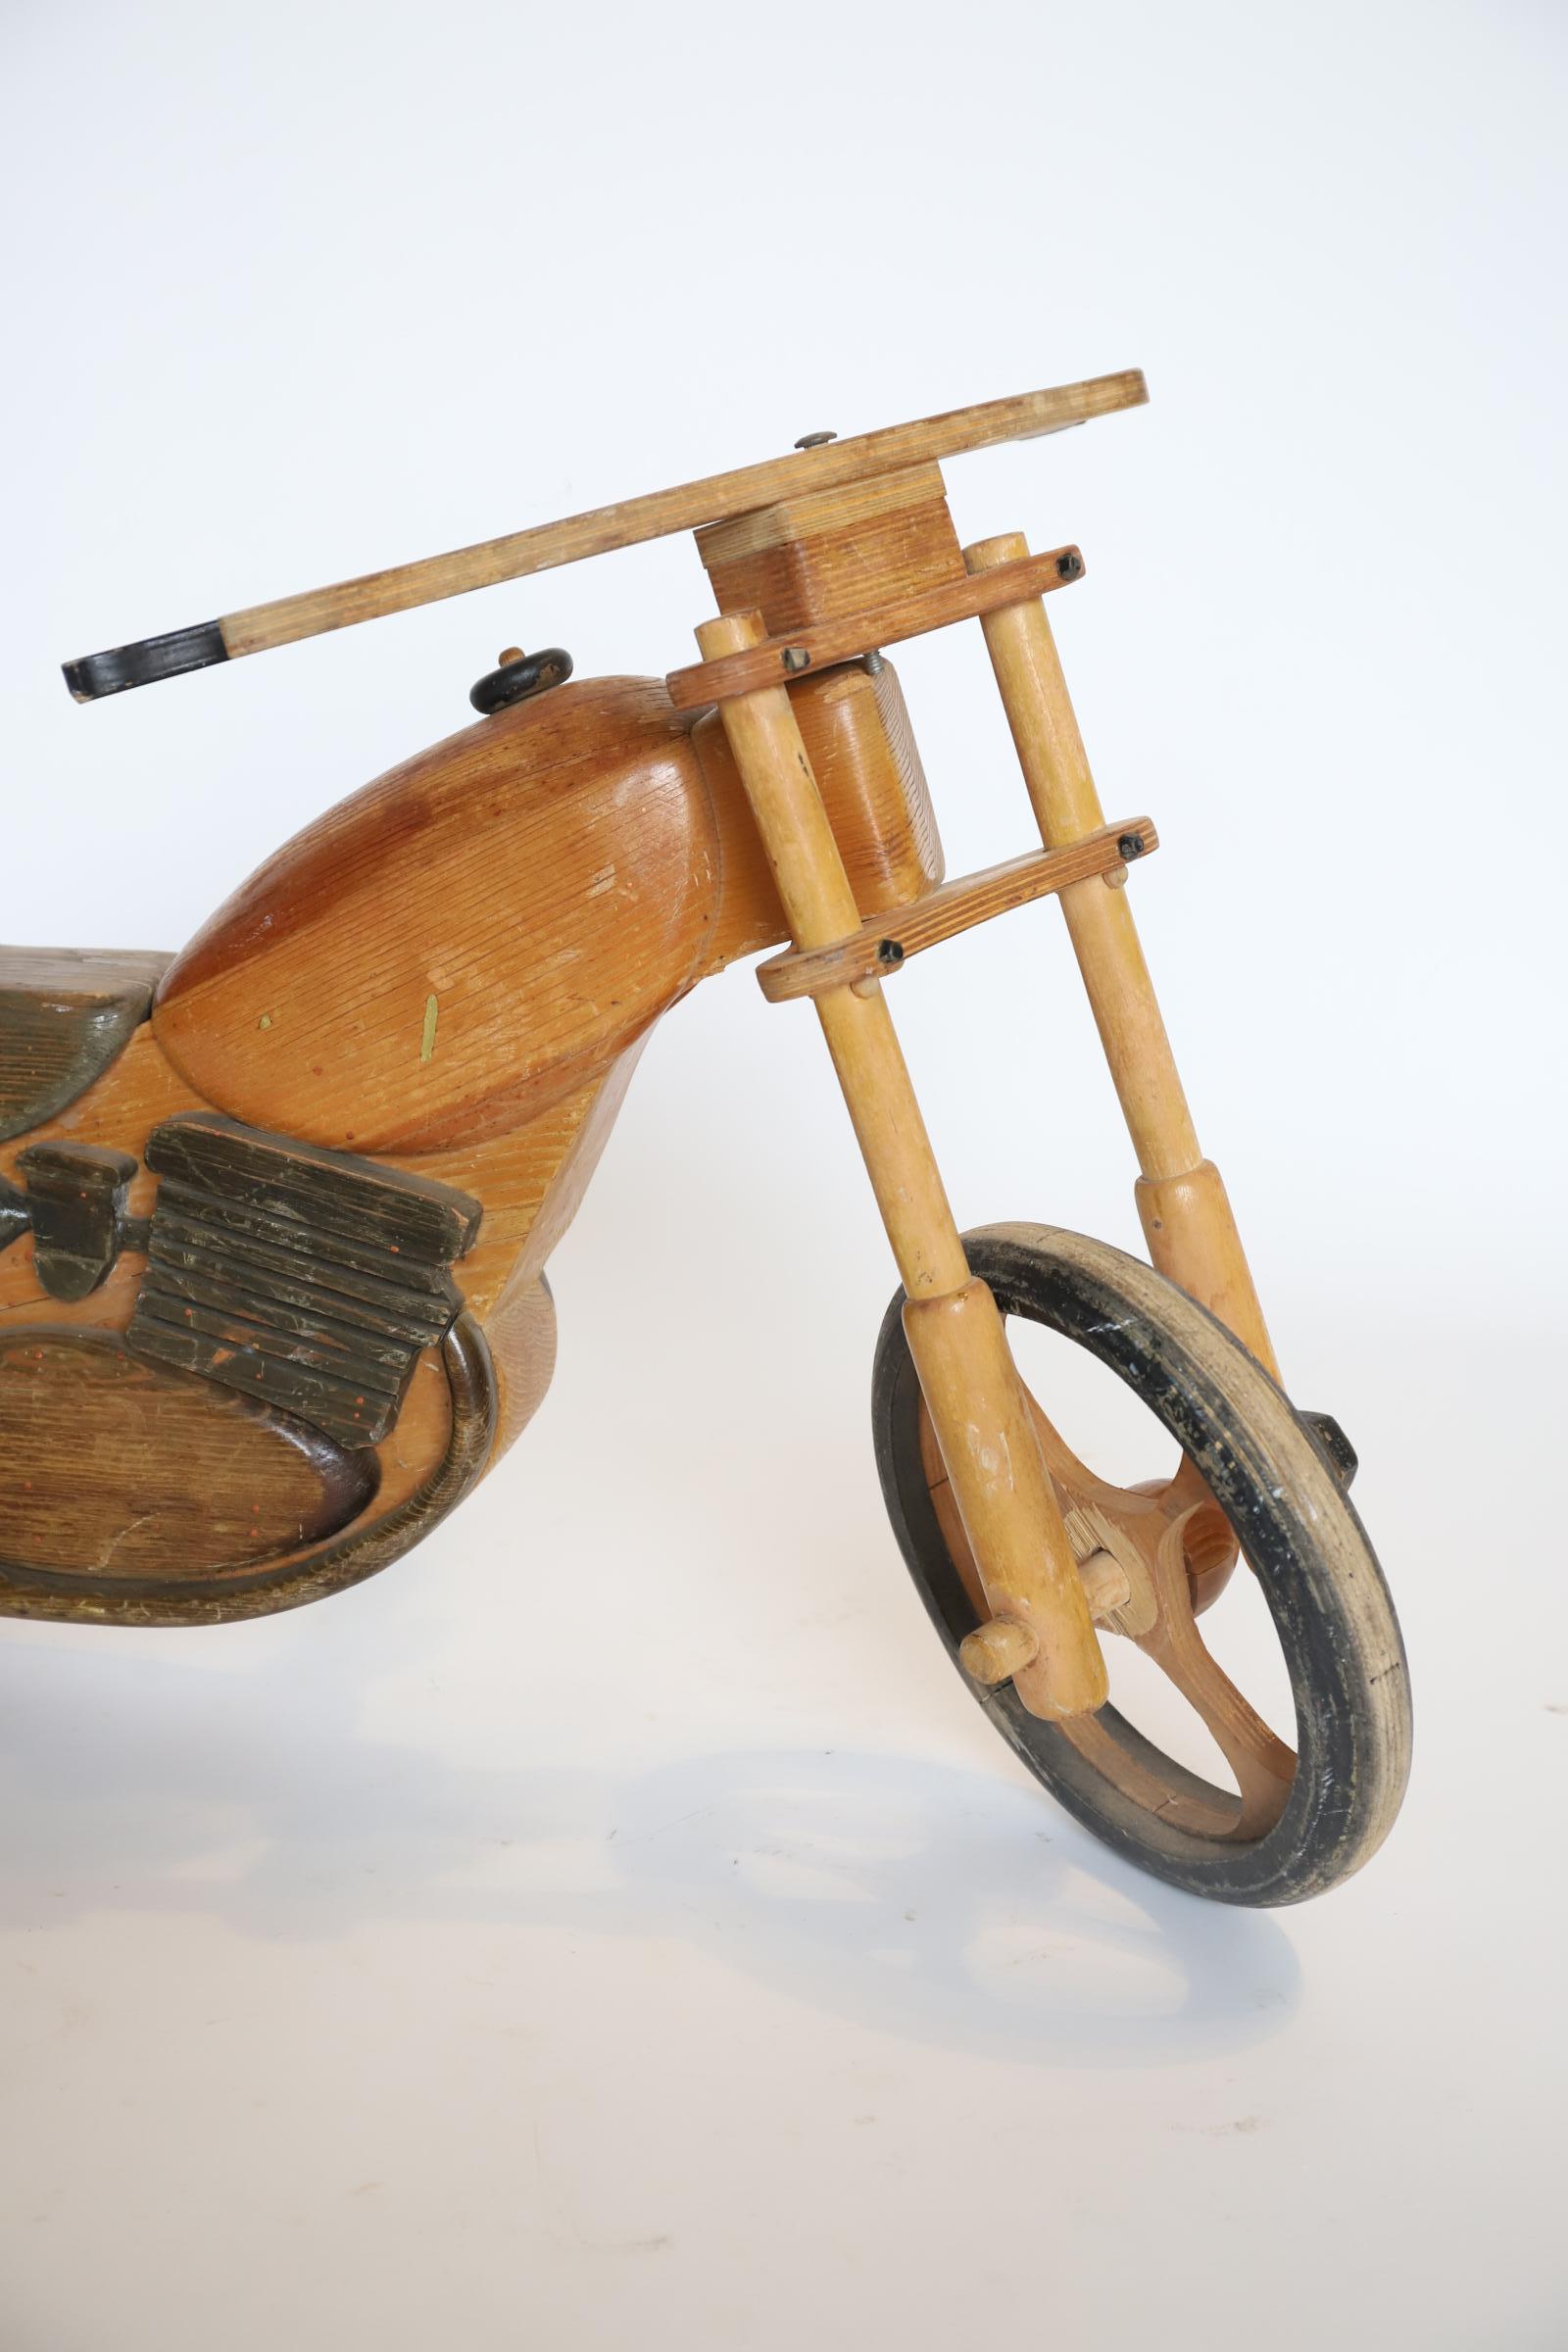 Bohemian Child Sized Wooden Motorcycle For Sale